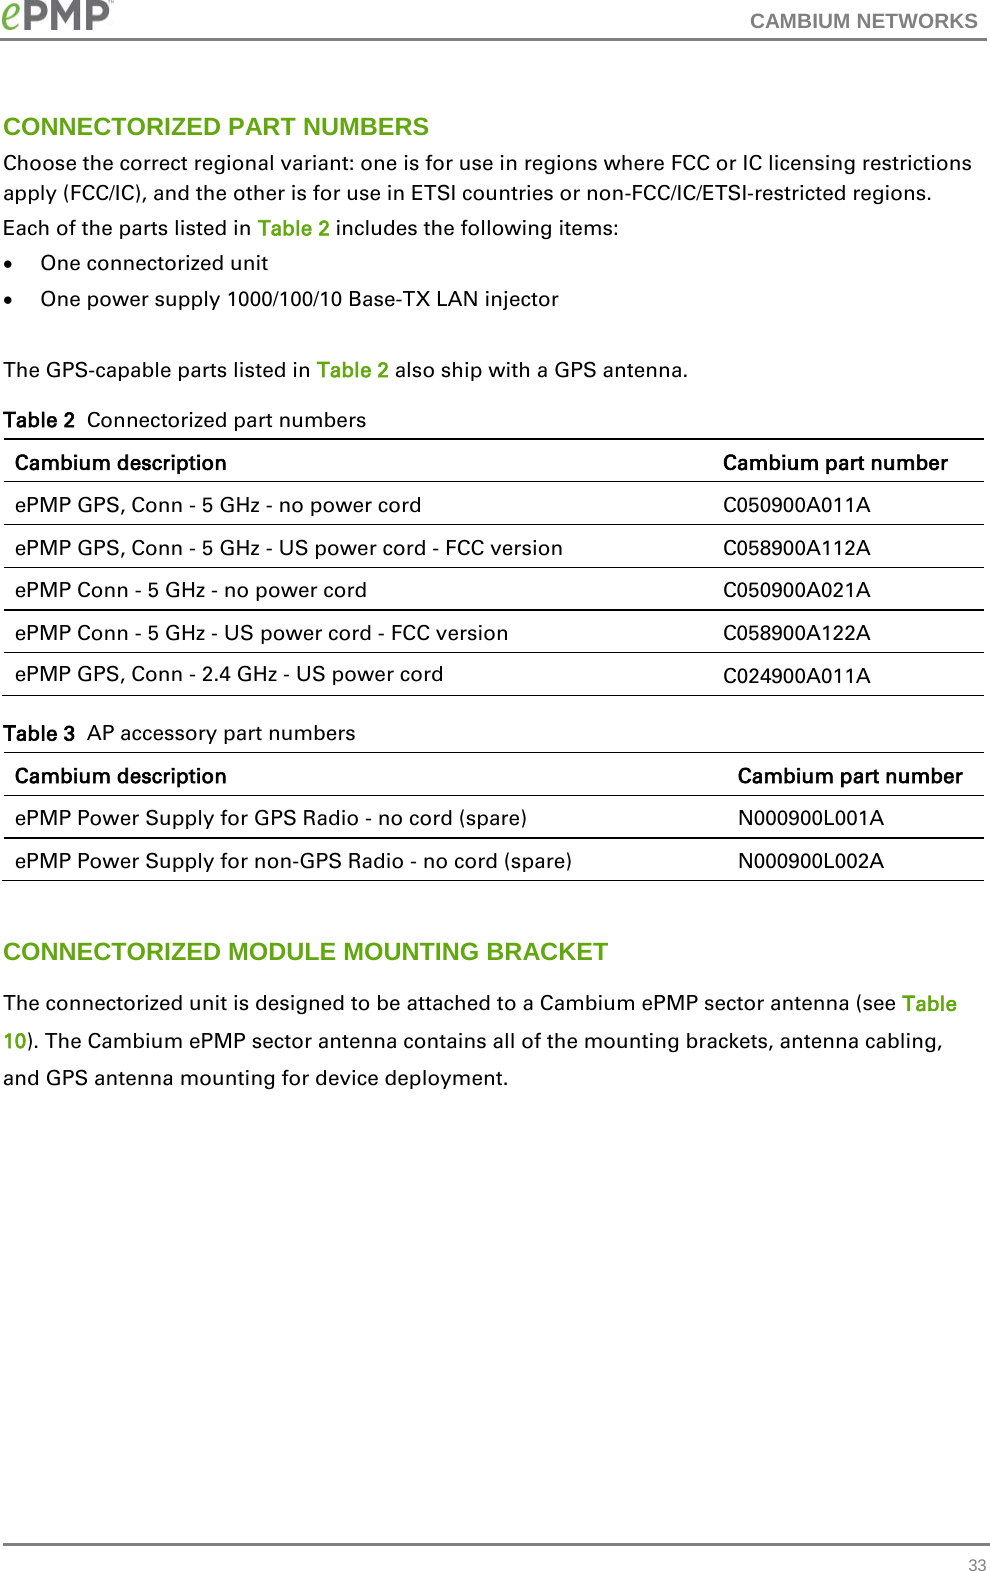 CAMBIUM NETWORKS  CONNECTORIZED PART NUMBERS Choose the correct regional variant: one is for use in regions where FCC or IC licensing restrictions apply (FCC/IC), and the other is for use in ETSI countries or non-FCC/IC/ETSI-restricted regions. Each of the parts listed in Table 2 includes the following items: • One connectorized unit • One power supply 1000/100/10 Base-TX LAN injector  The GPS-capable parts listed in Table 2 also ship with a GPS antenna. Table 2  Connectorized part numbers Cambium description Cambium part number ePMP GPS, Conn - 5 GHz - no power cord C050900A011A ePMP GPS, Conn - 5 GHz - US power cord - FCC version C058900A112A ePMP Conn - 5 GHz - no power cord C050900A021A ePMP Conn - 5 GHz - US power cord - FCC version C058900A122A ePMP GPS, Conn - 2.4 GHz - US power cord C024900A011A Table 3  AP accessory part numbers Cambium description Cambium part number ePMP Power Supply for GPS Radio - no cord (spare) N000900L001A ePMP Power Supply for non-GPS Radio - no cord (spare) N000900L002A  CONNECTORIZED MODULE MOUNTING BRACKET  The connectorized unit is designed to be attached to a Cambium ePMP sector antenna (see Table 10). The Cambium ePMP sector antenna contains all of the mounting brackets, antenna cabling, and GPS antenna mounting for device deployment.  33 